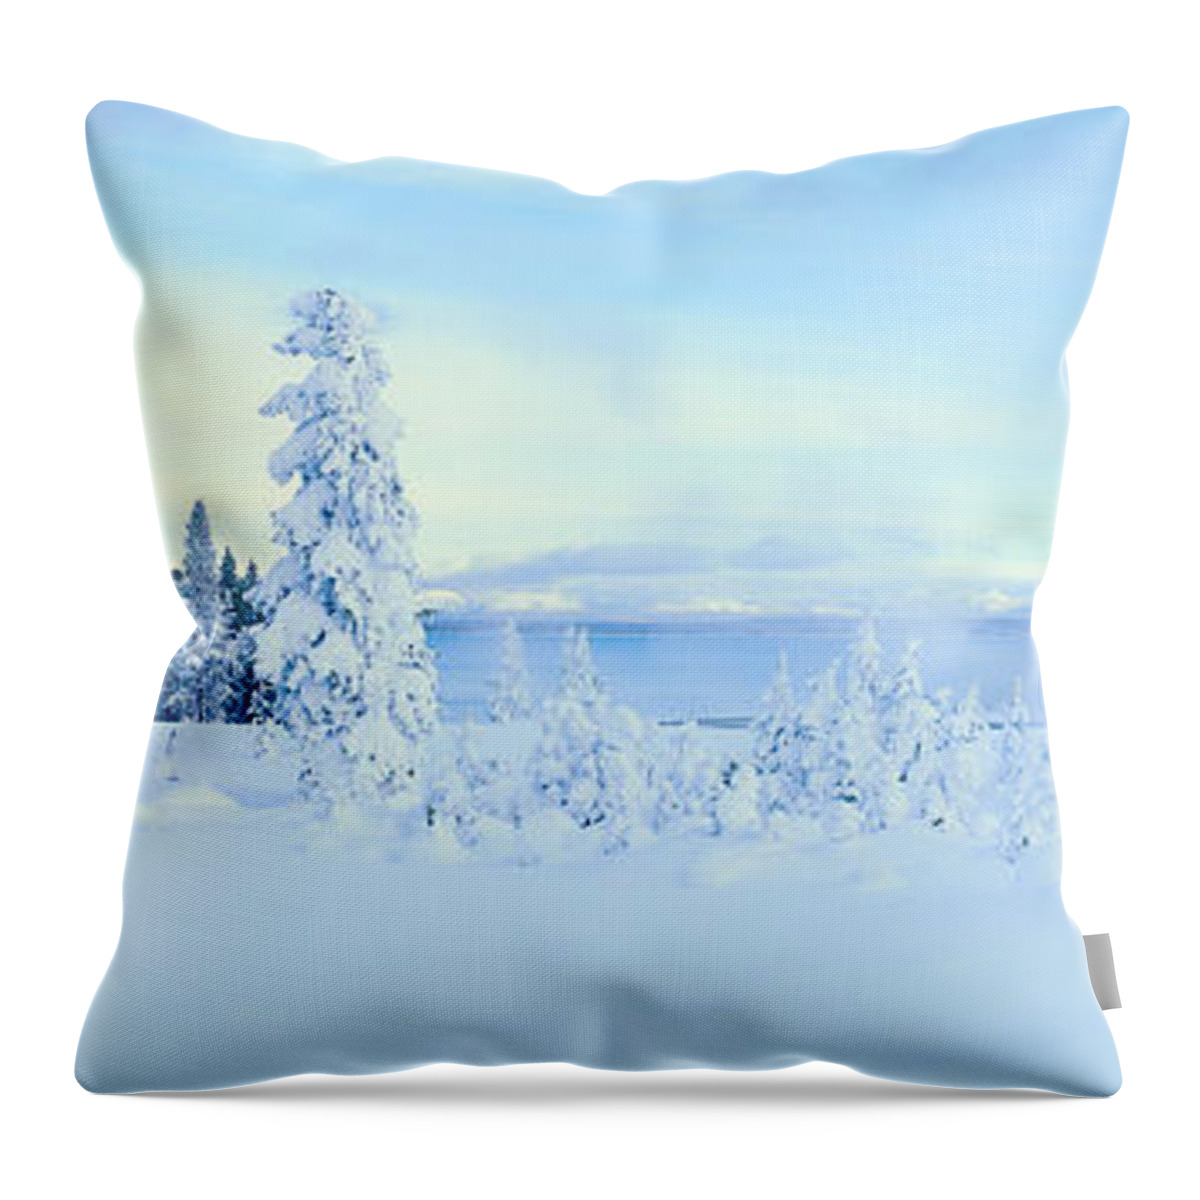 West Thumb Geyser Basin Throw Pillow featuring the photograph West Thumb Geyser Basin, Yellowstone #1 by Jeremy Woodhouse